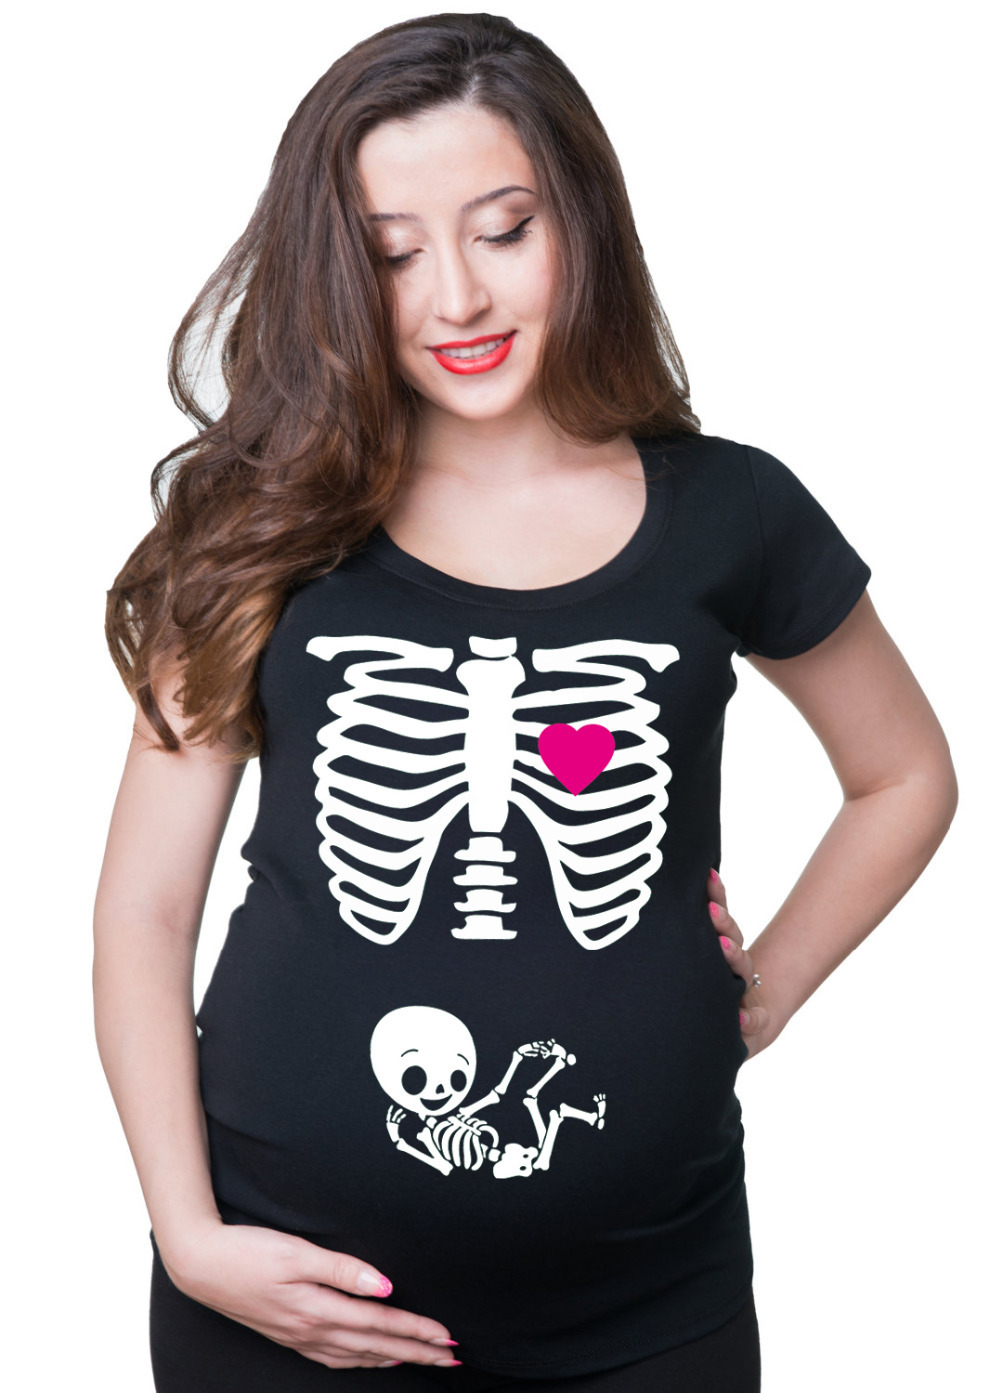 2015 Maternity Pregnancy Funny Xray Skeleton Bany Print Clothes For Pregnant Women Maternity T